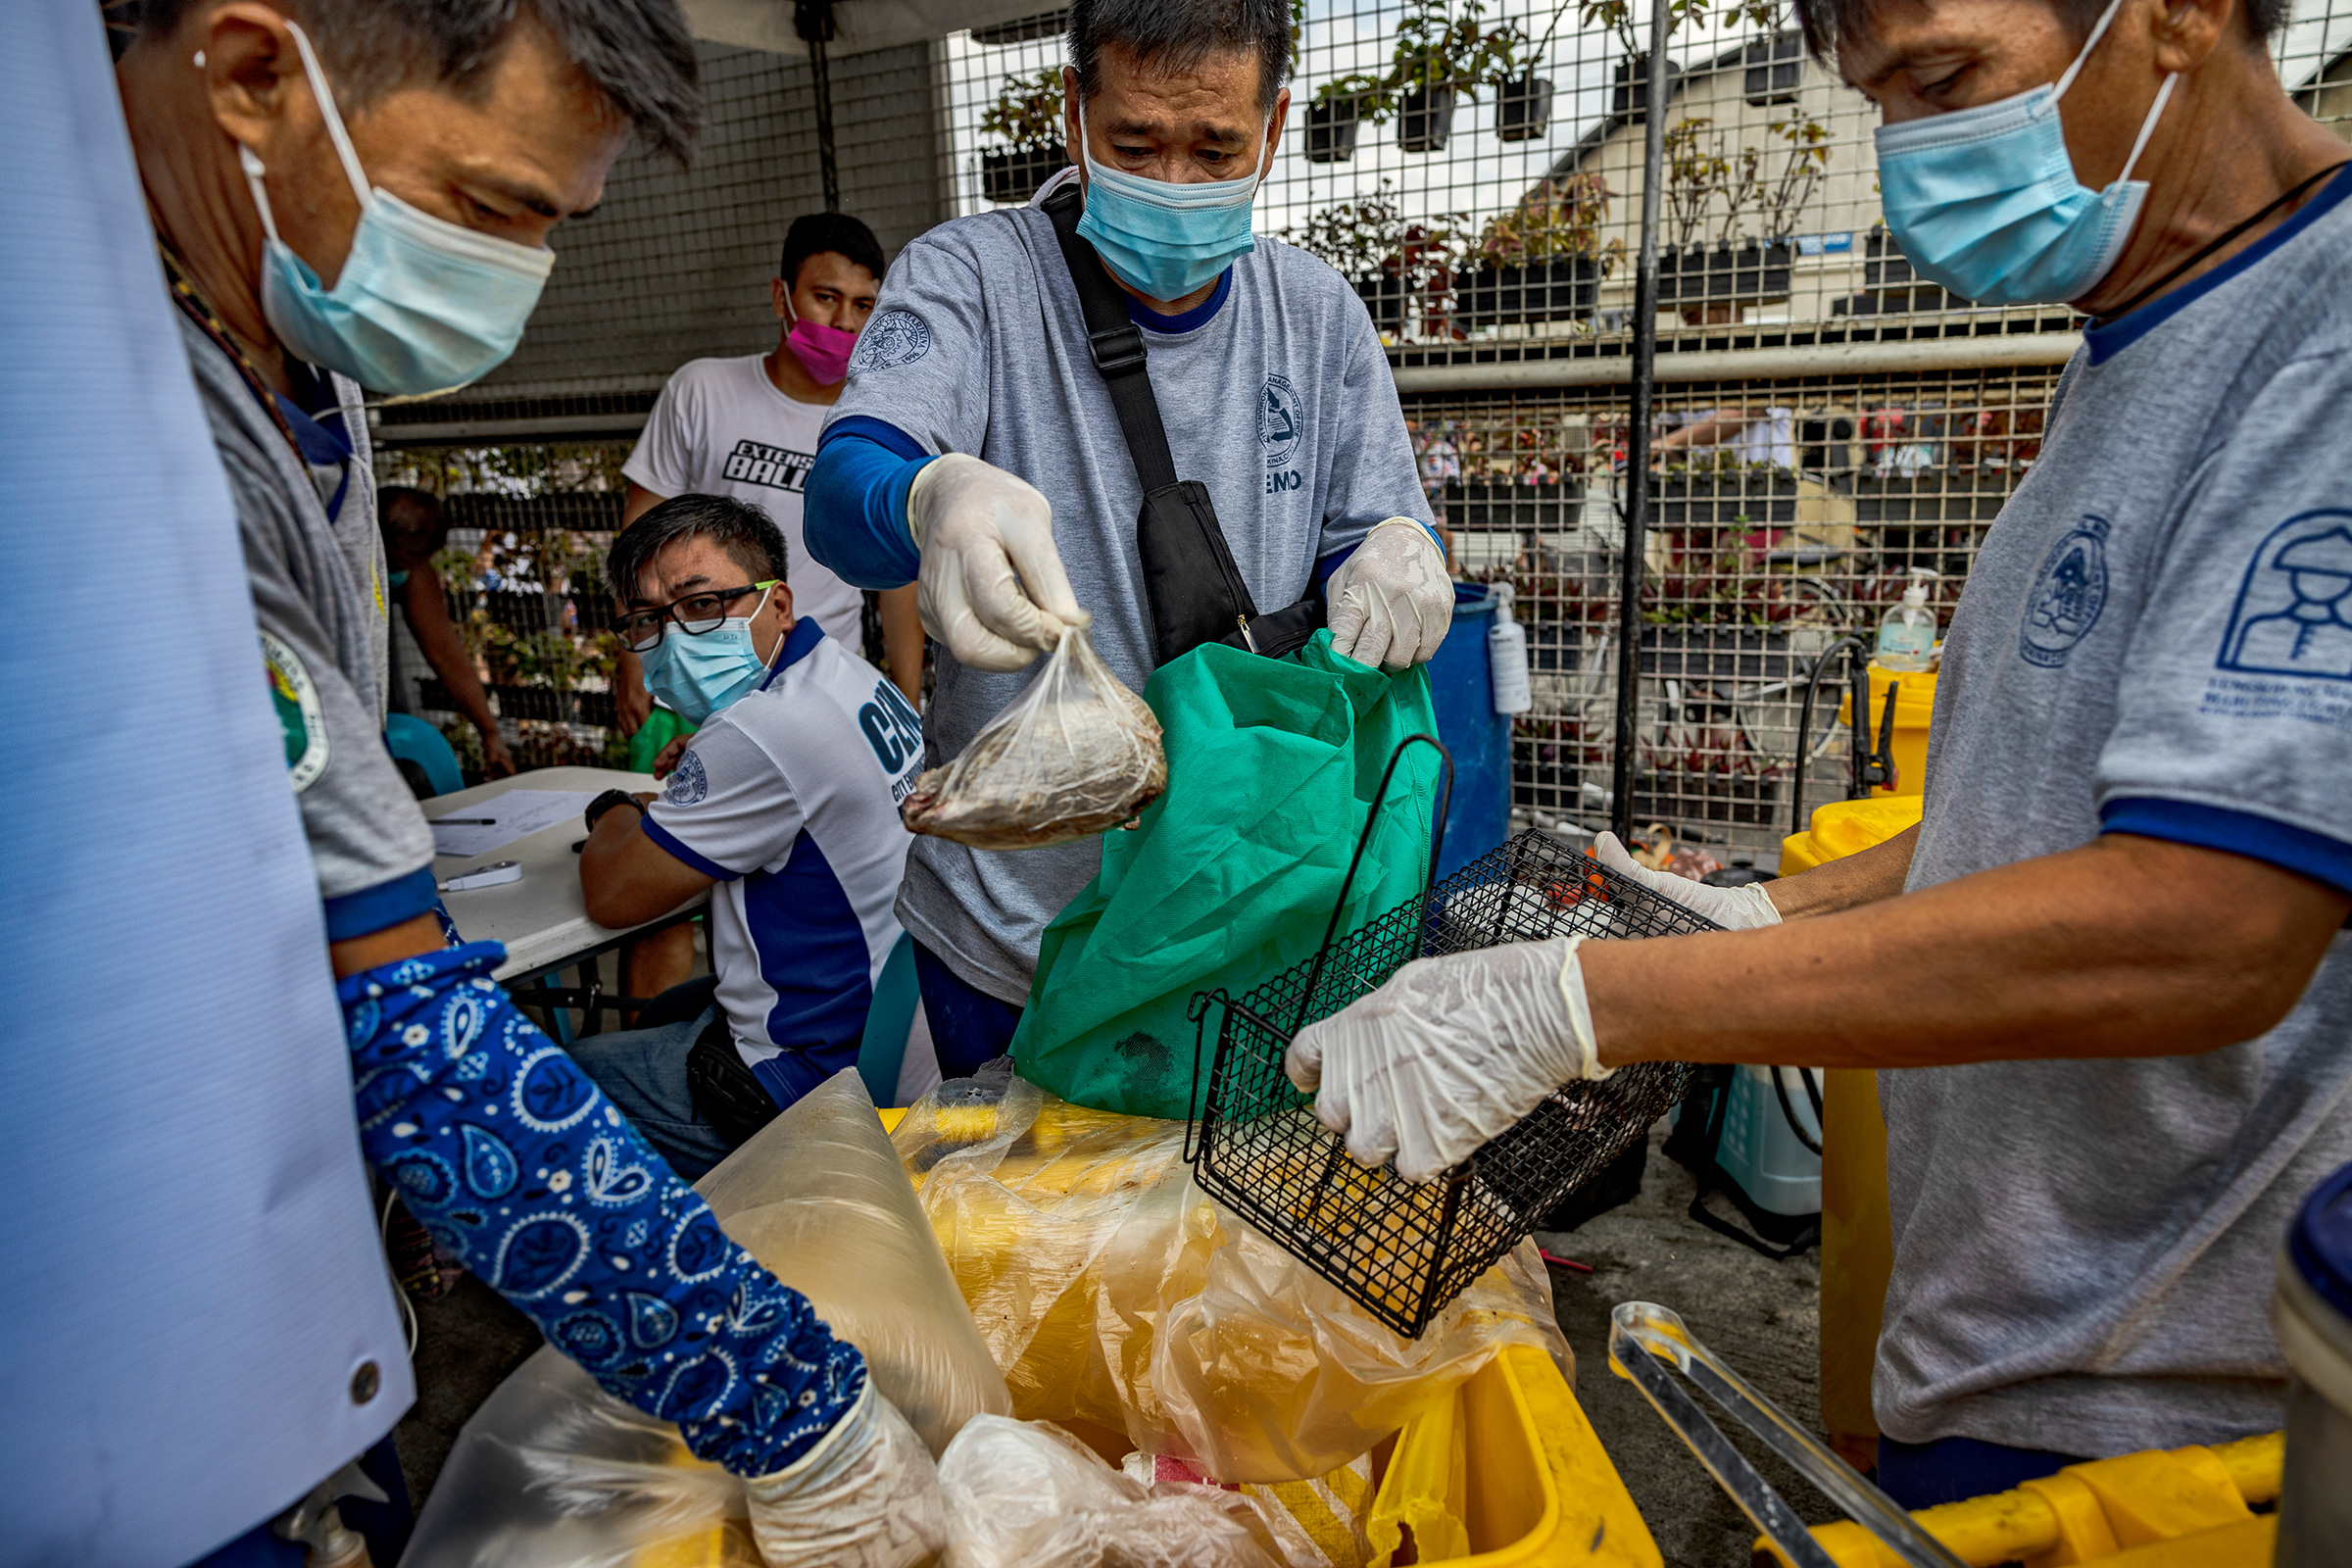 City sanitation officers dispose of rats turned over by residents in exchange for cash at the City Environmental Management Office in Marikina, Manila, Philippines, on Sept. 15, 2022. (Ezra Acayan—Getty Images)